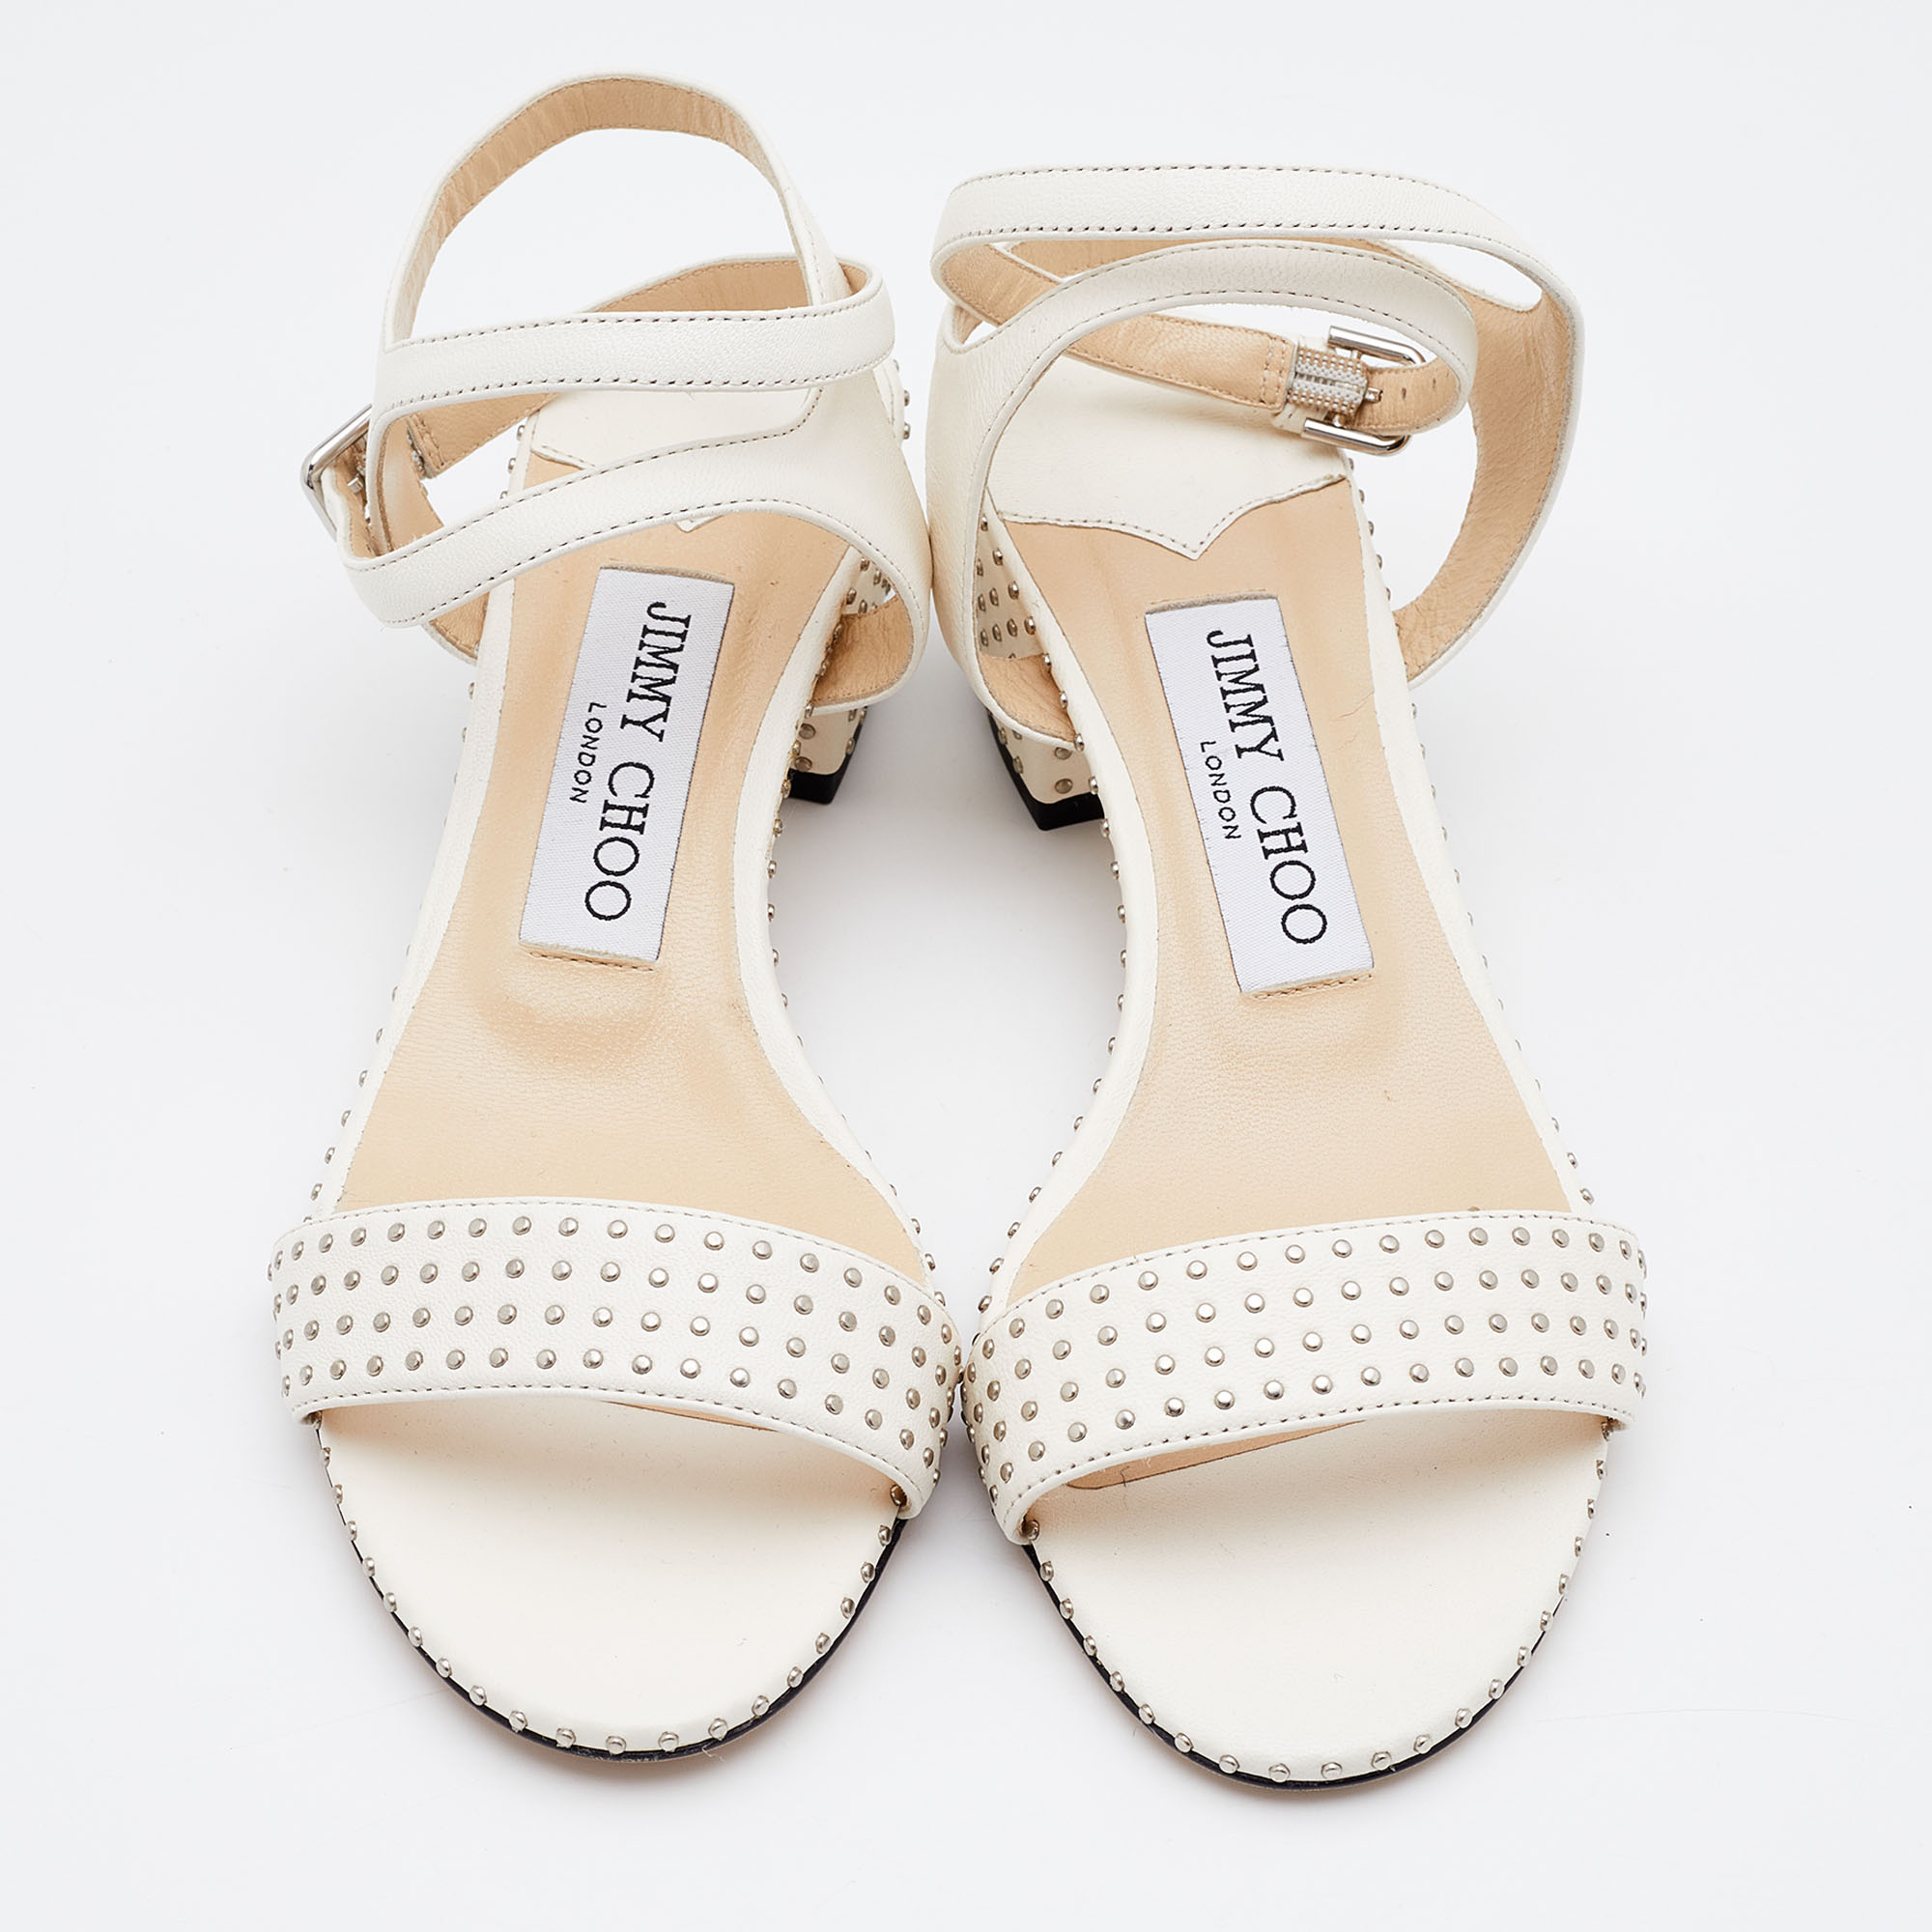 Jimmy Choo White Studded Leather Marine Block Heel Ankle Strap Sandals Size 36.5